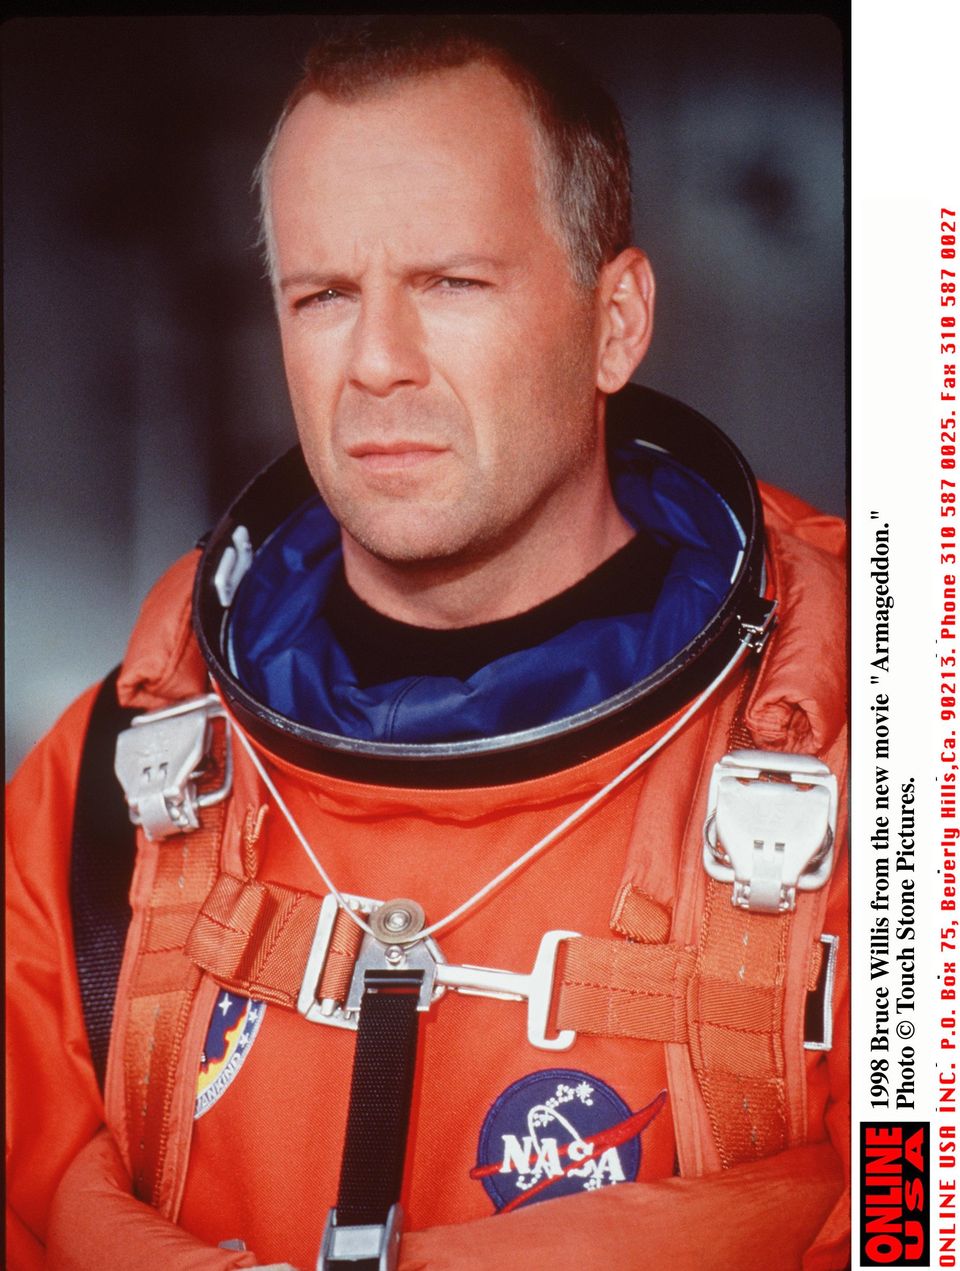 1998 Bruce Willis In "Armageddon." | Source: Getty Images